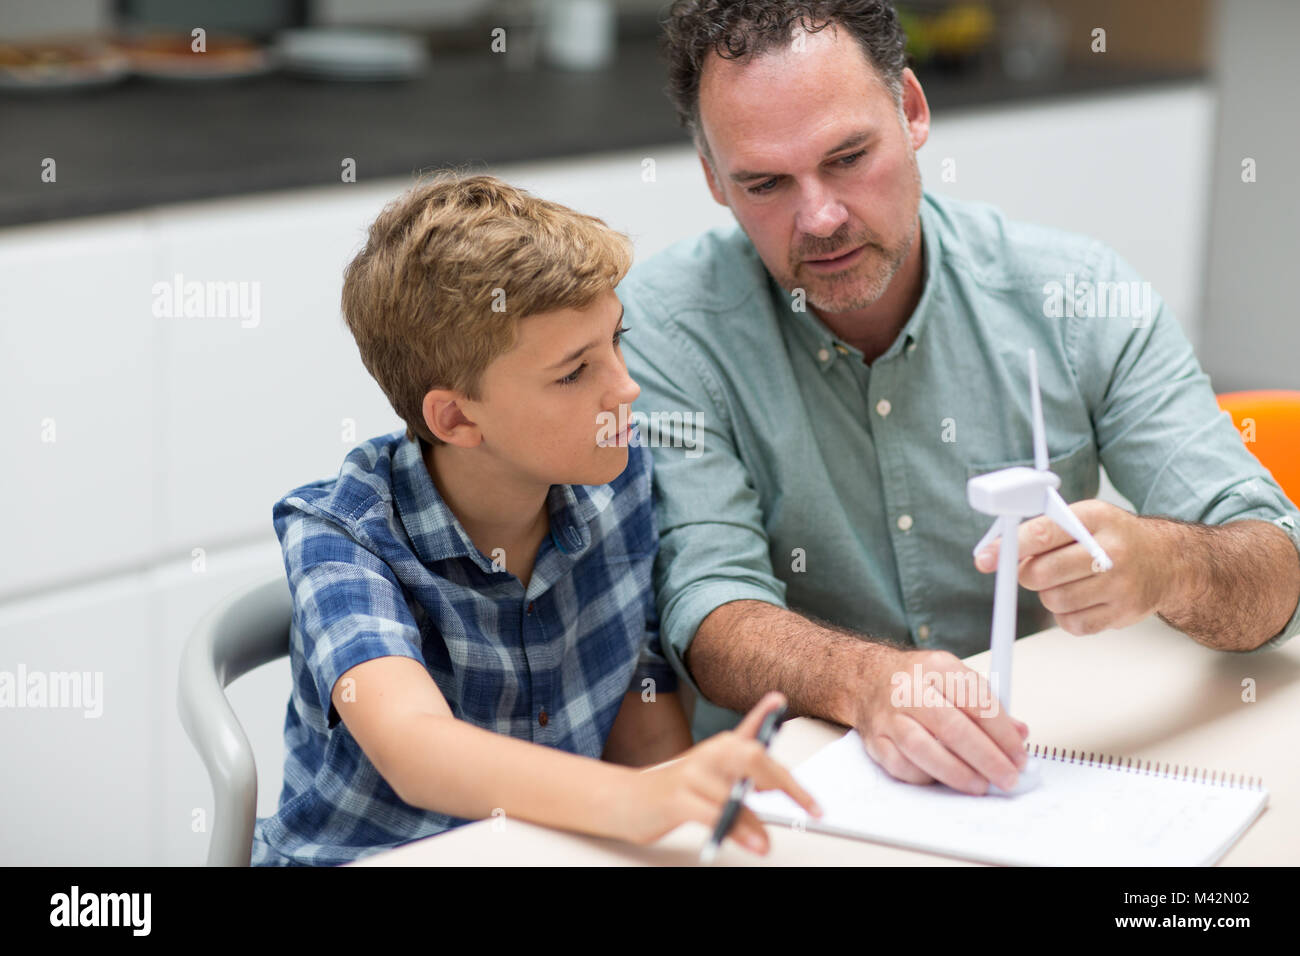 Father helping son with school project Stock Photo